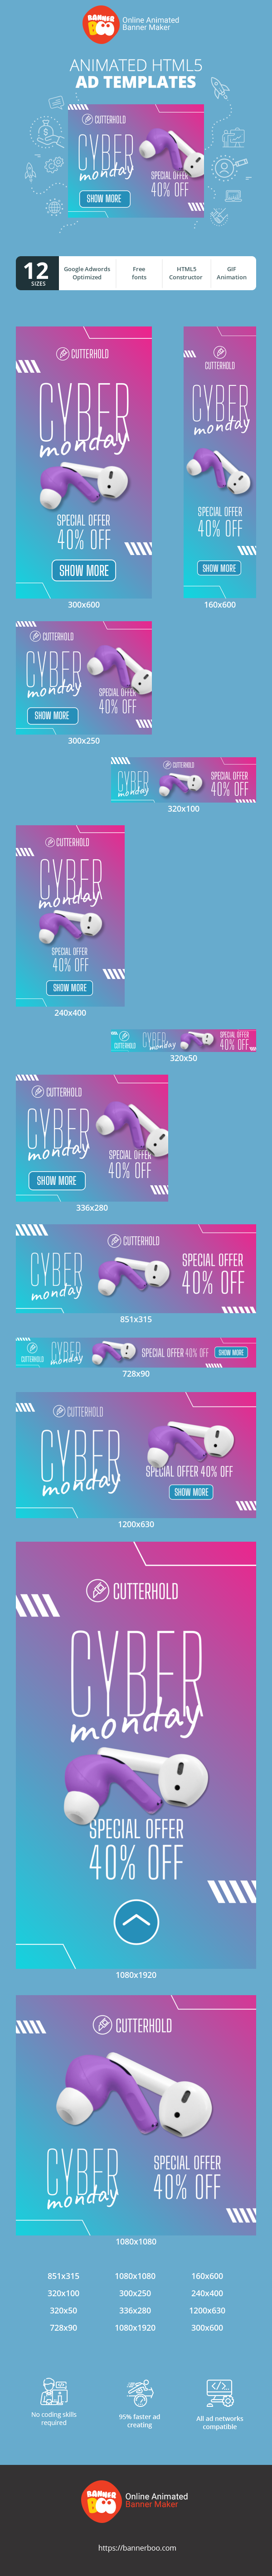 Banner ad template — Cyber Monday — Special Offer 40% Off